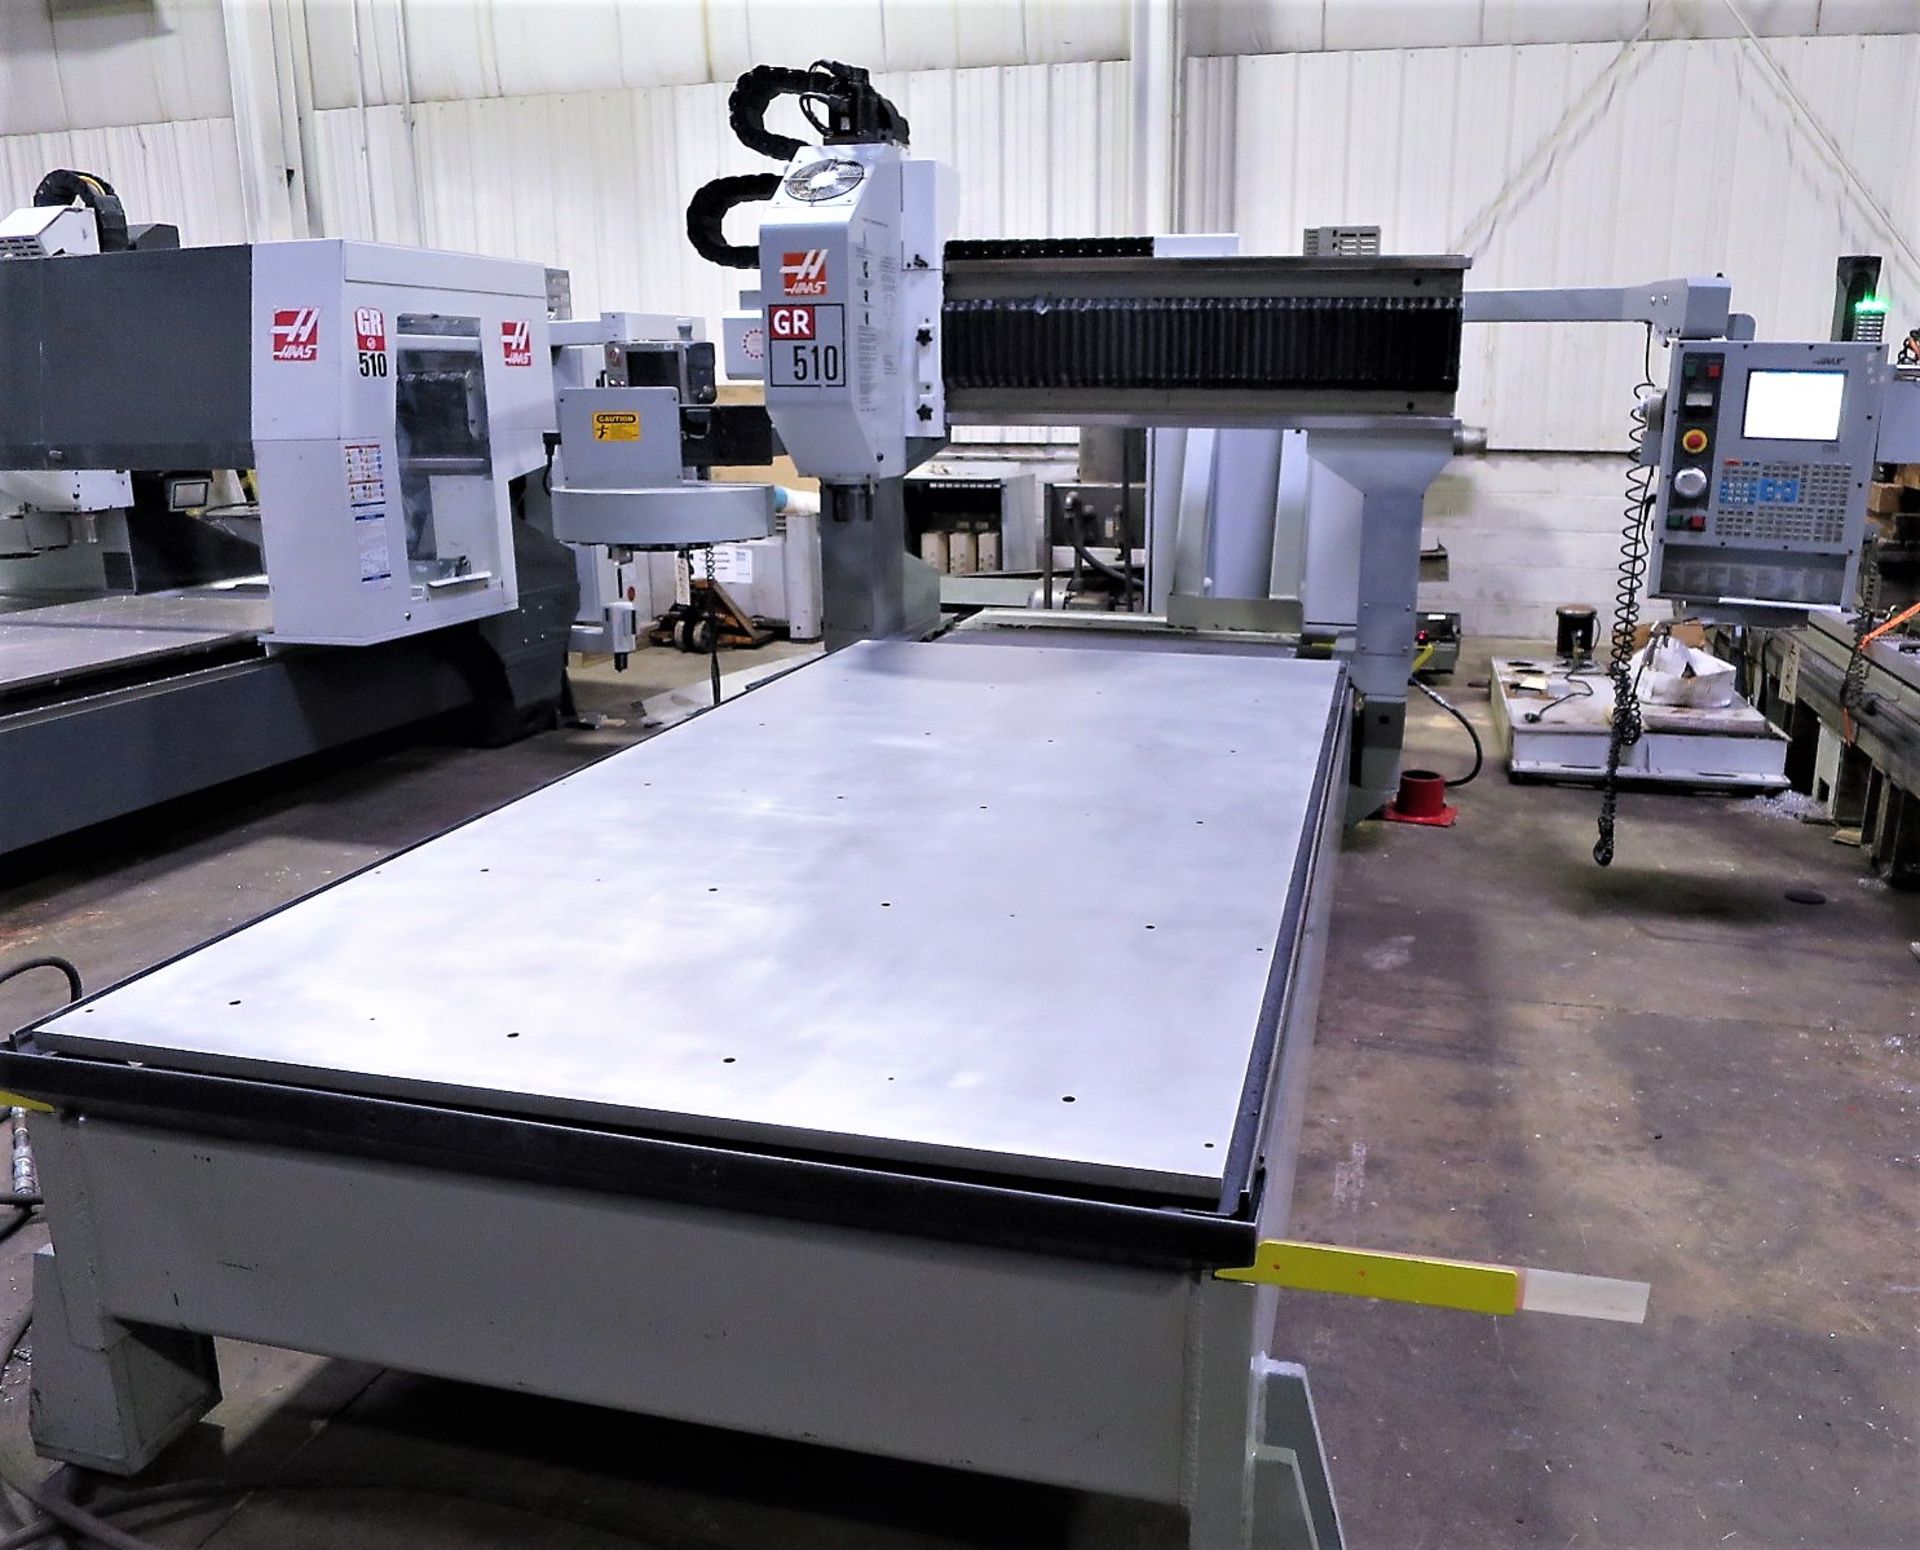 5'x10' Haas Model GR510 3-Axis CNC Router Vertical, S/N 31060, New 2003